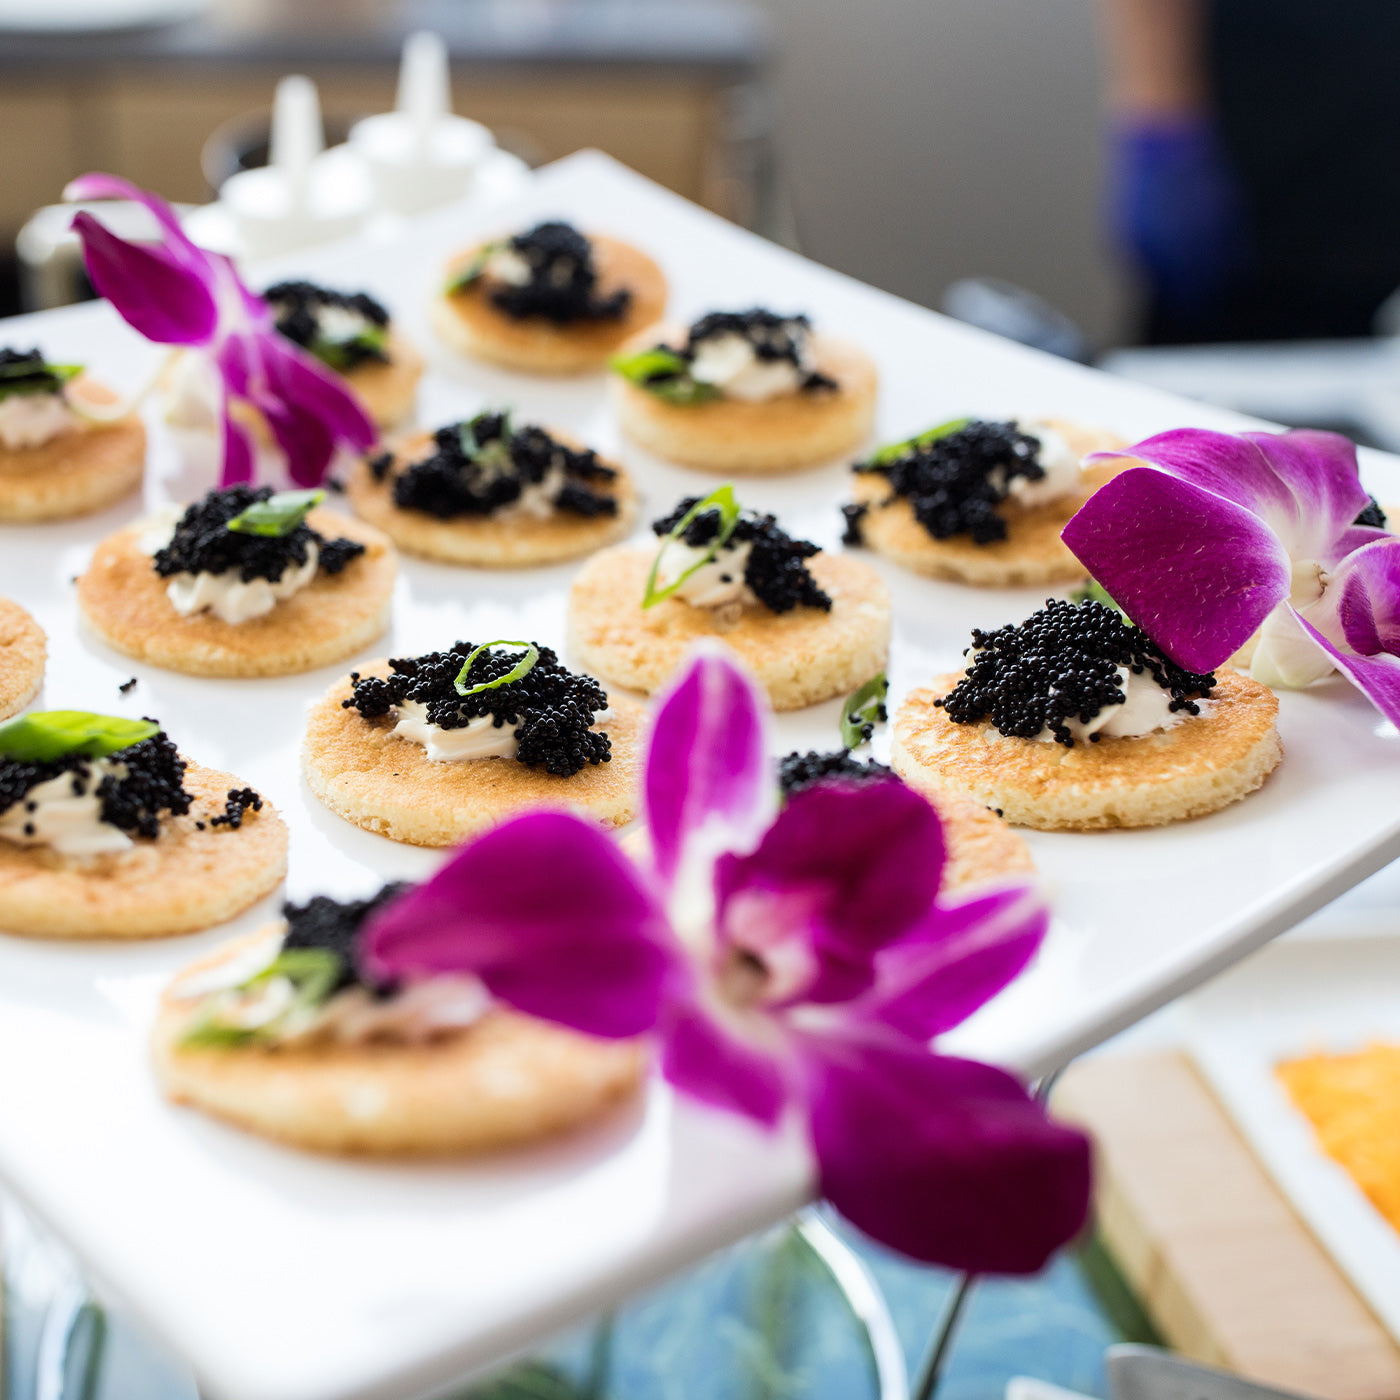 Crisps with caviar arranged on plate with flowers as garnish